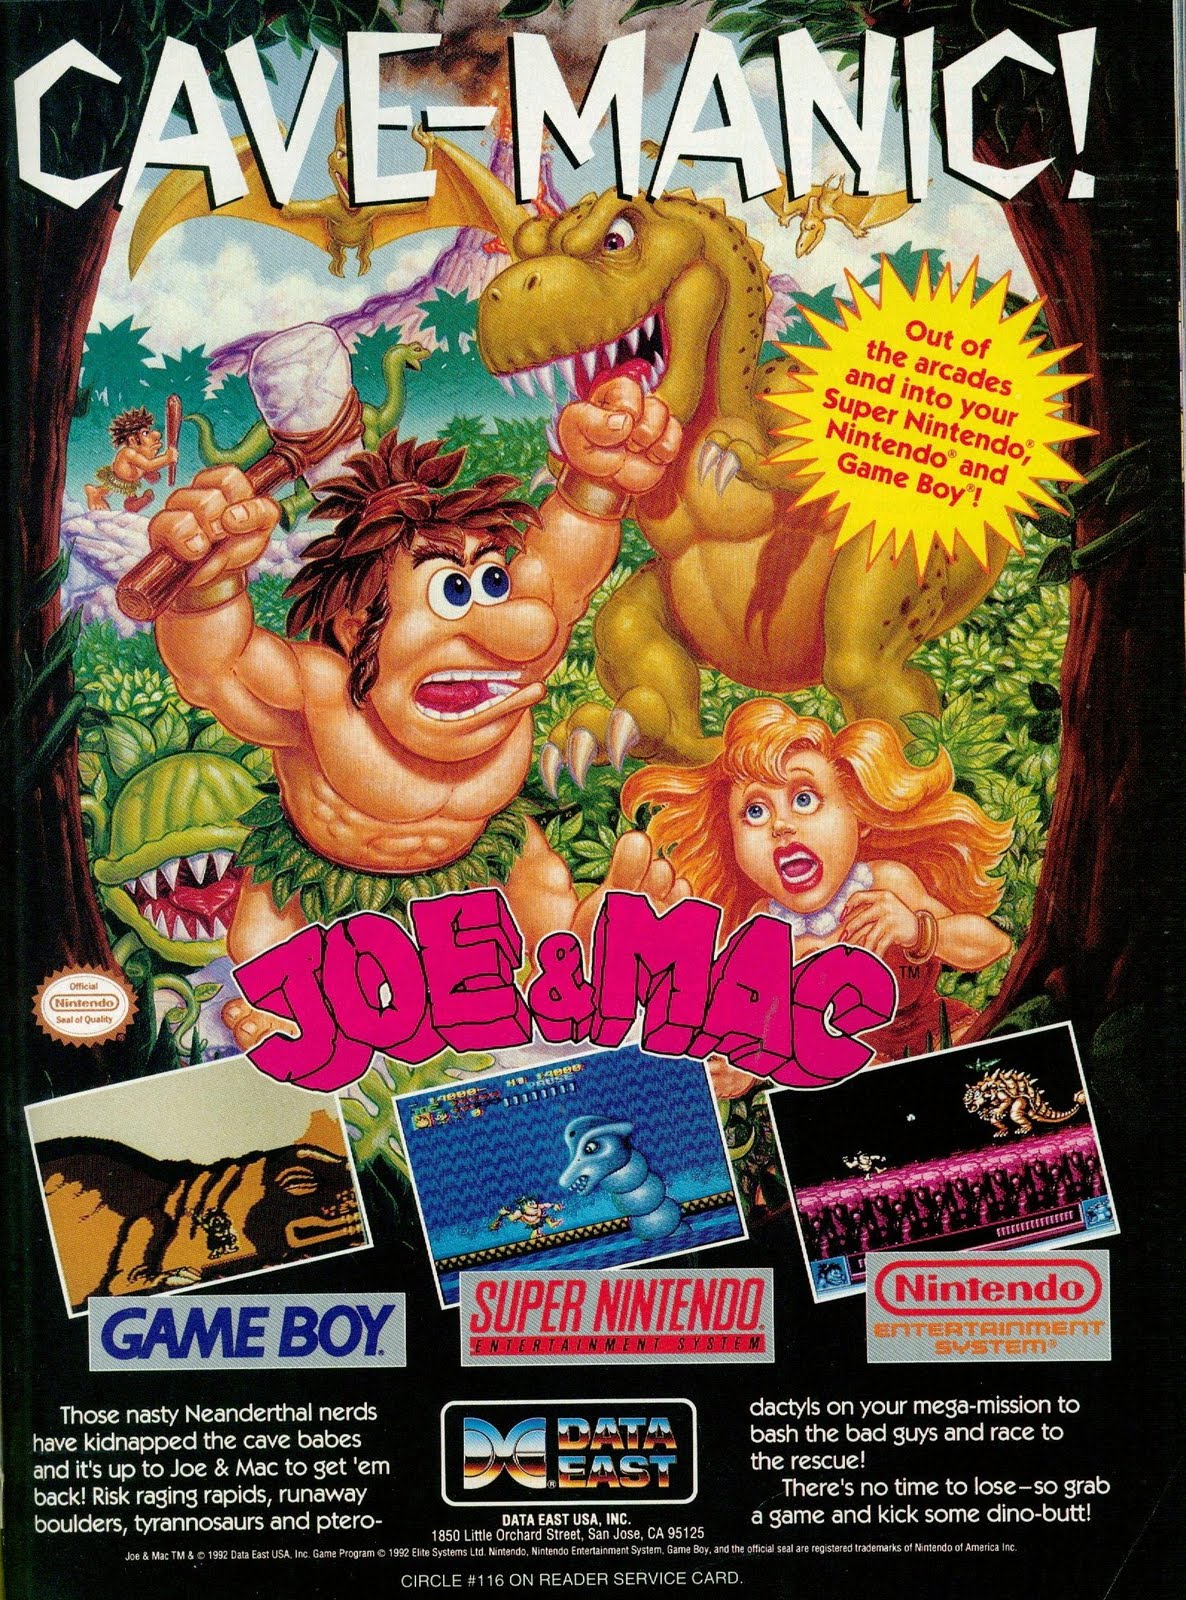 vintage gaming ads - Video game - CaveManic! Out of the arcades and into your Super Nintendo, Nintendo' and Game Boy! Game Boy Nintendo Super Nintendo Those nasty Neanderthal nerd have kidnapped the cave babes and 's up to Joe & Mac to get 'em back Risk r